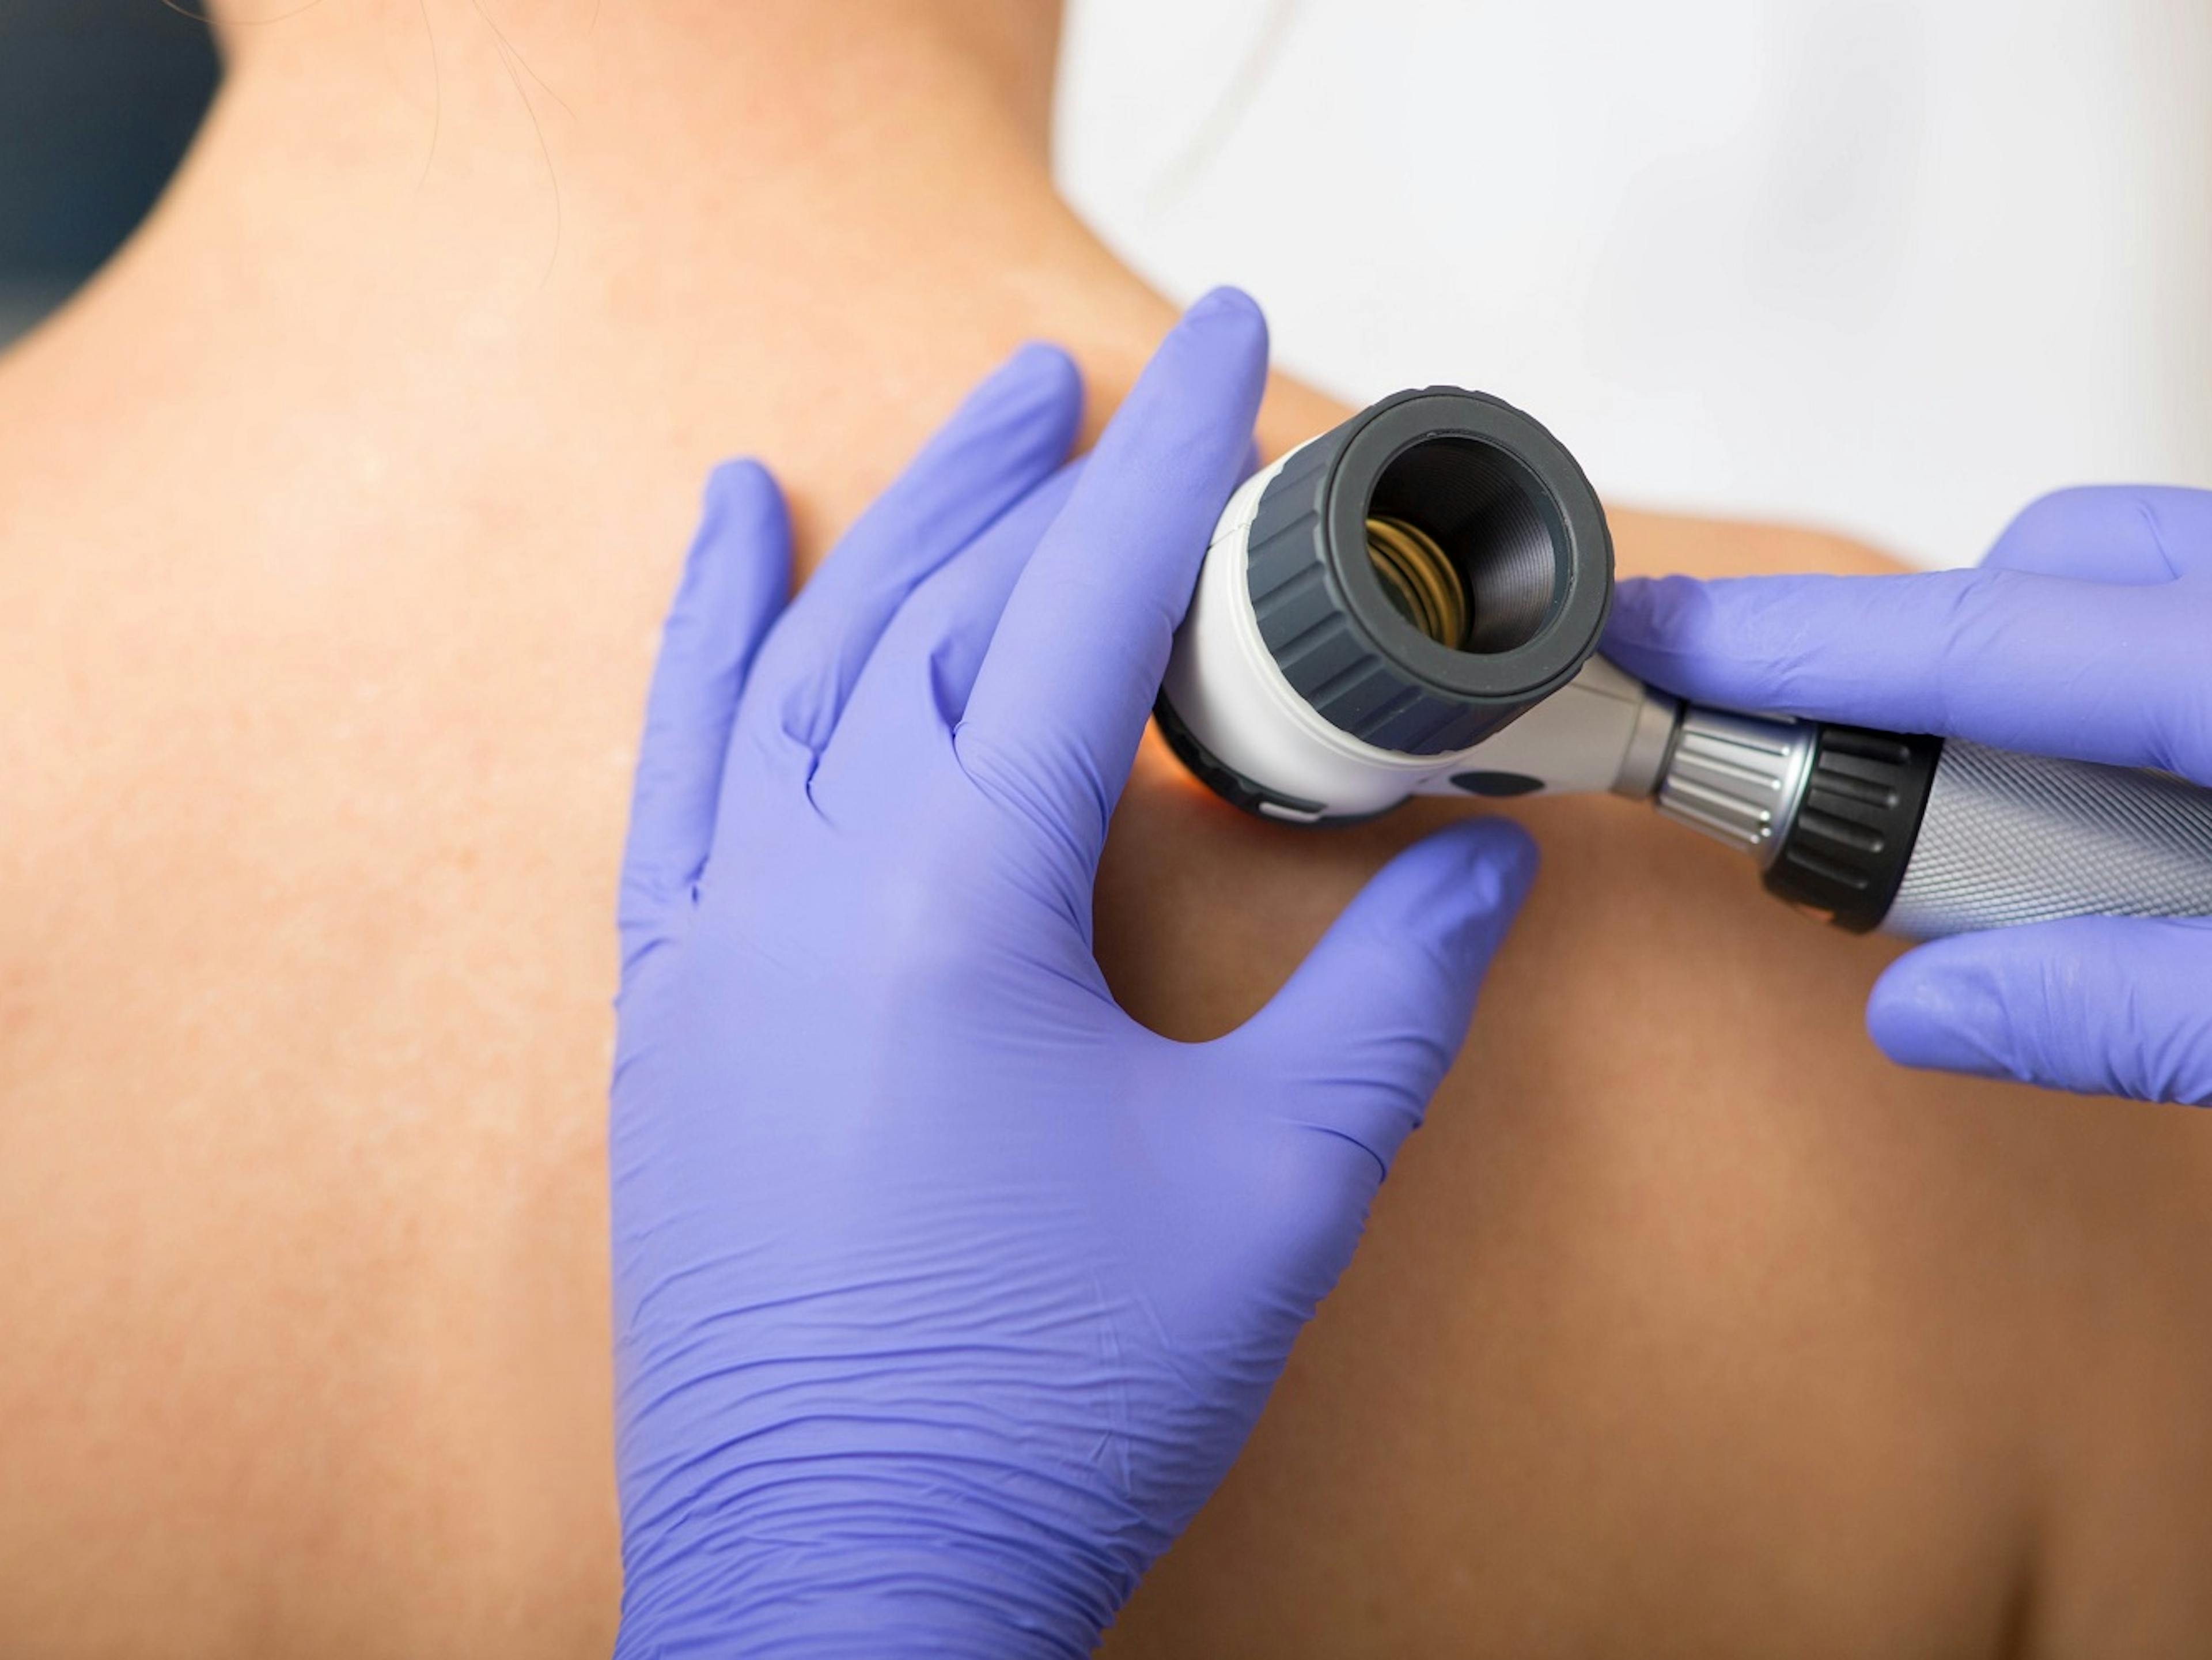 Does Medicaid Cover a Dermatologist?